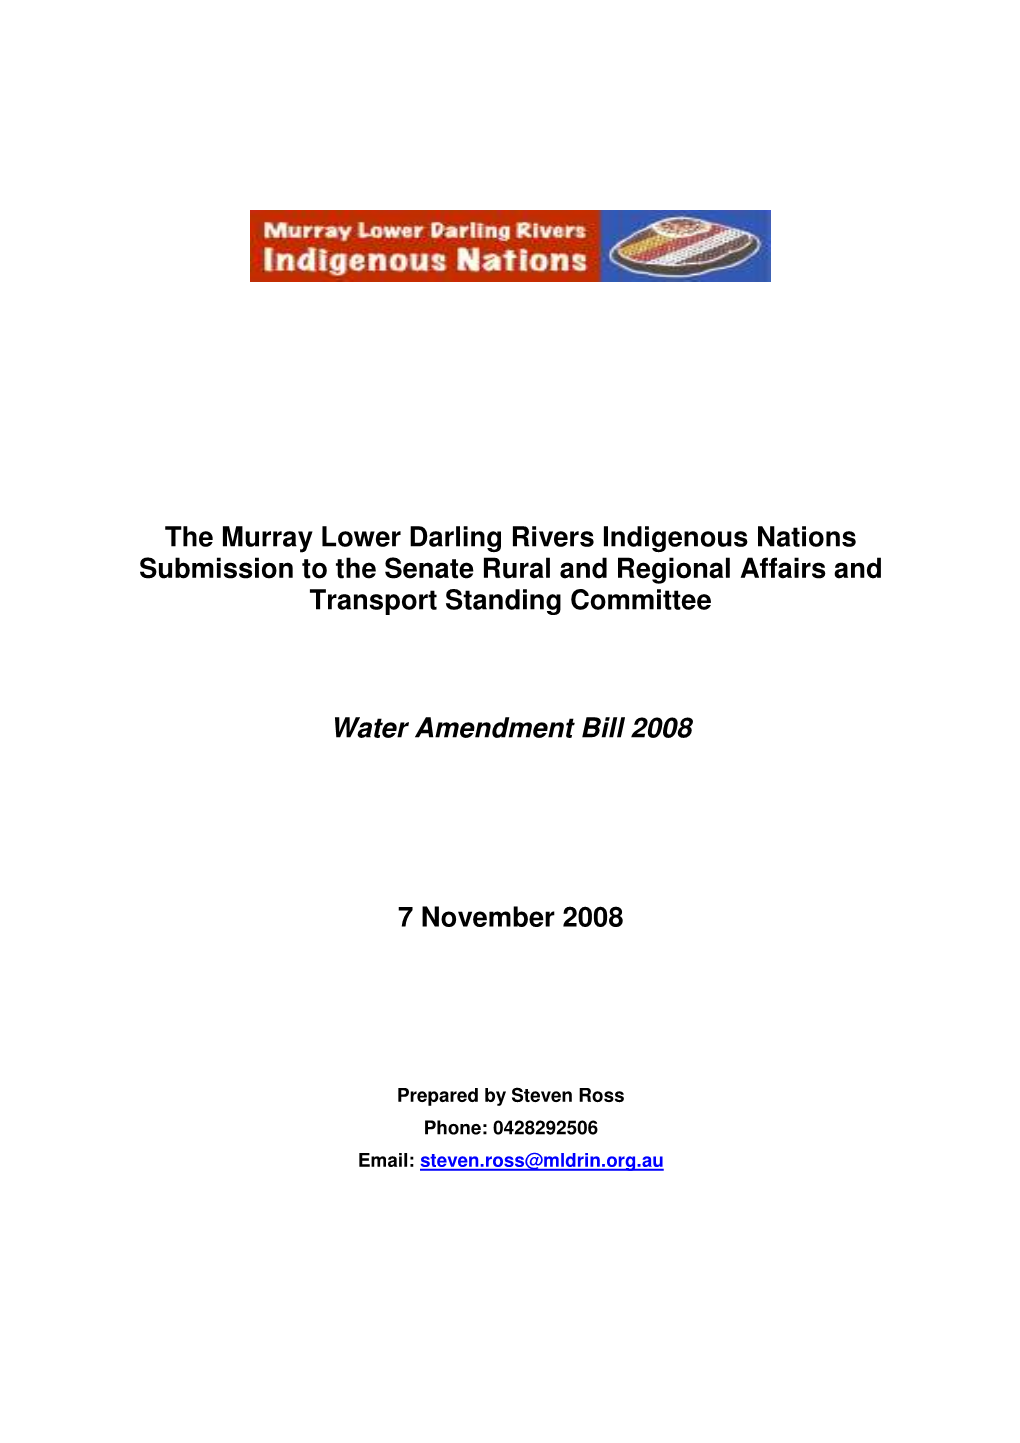 Submissions: Inquiry Into the Water Amendment Bill 2008